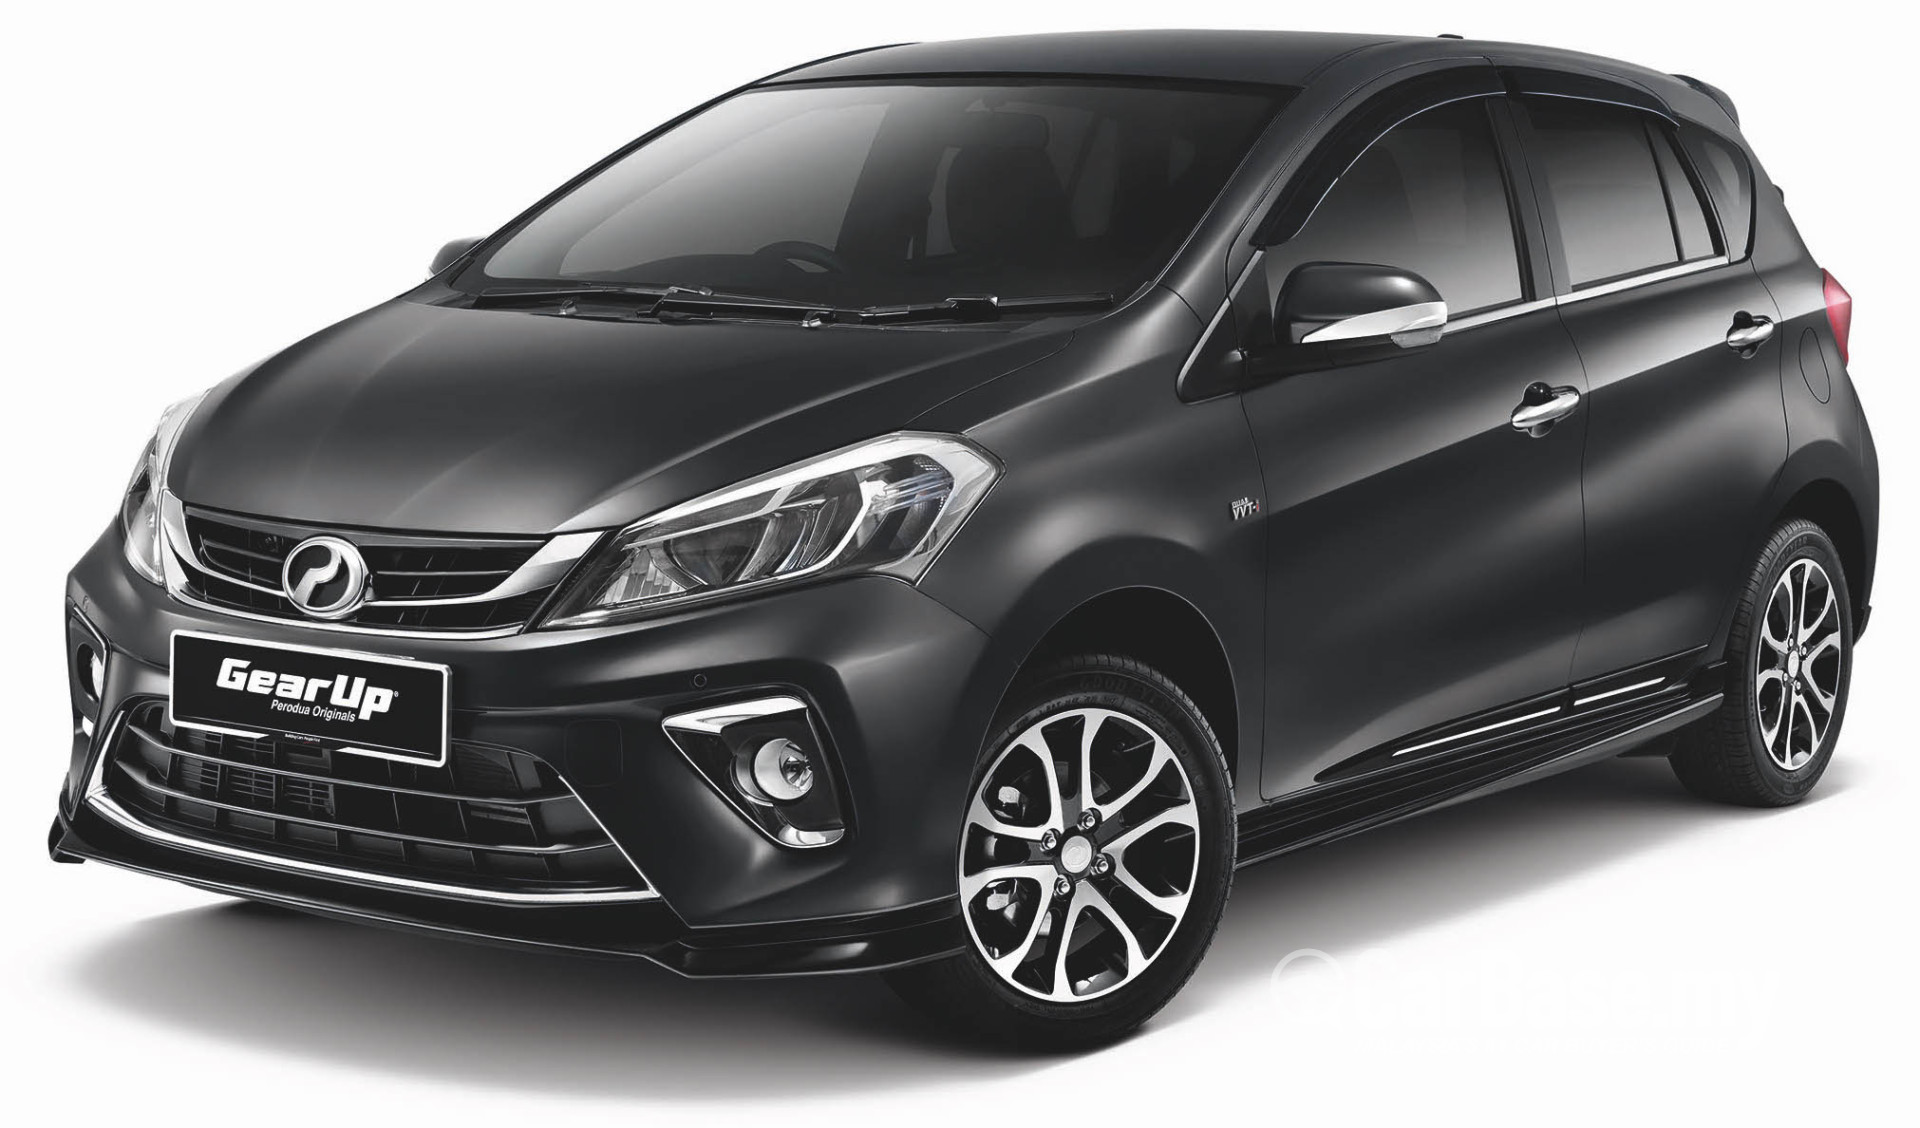 Perodua Myvi D20N (2017) Exterior Image #43148 in Malaysia  Reviews, Specs, Prices  CarBase.my